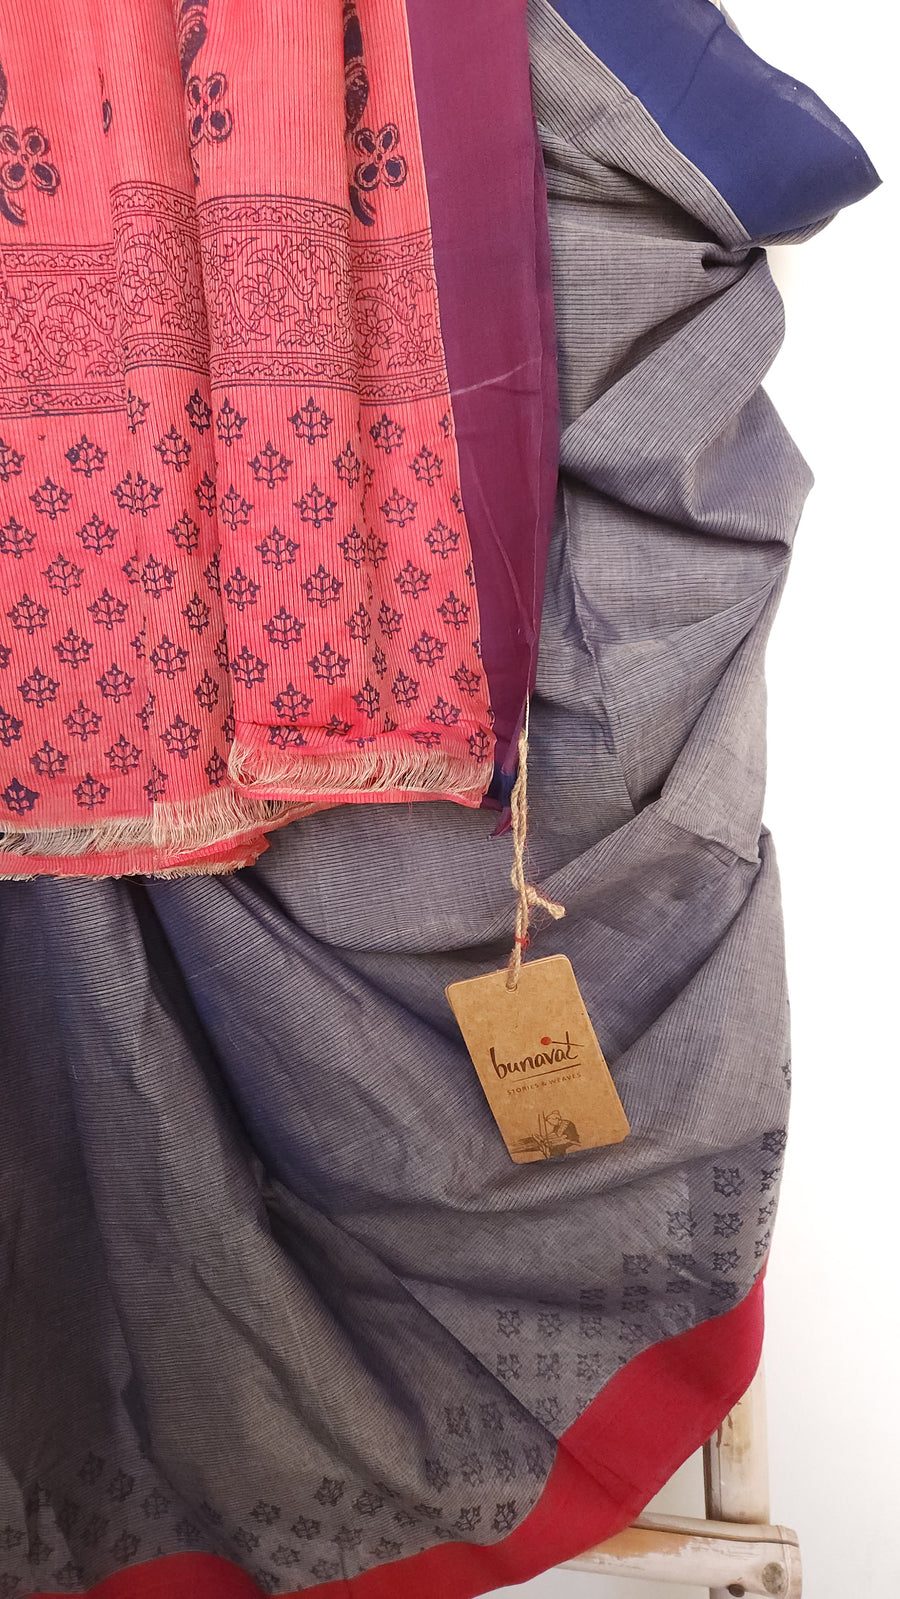 'ANKHI' Hand block printed on Handwoven Cotton